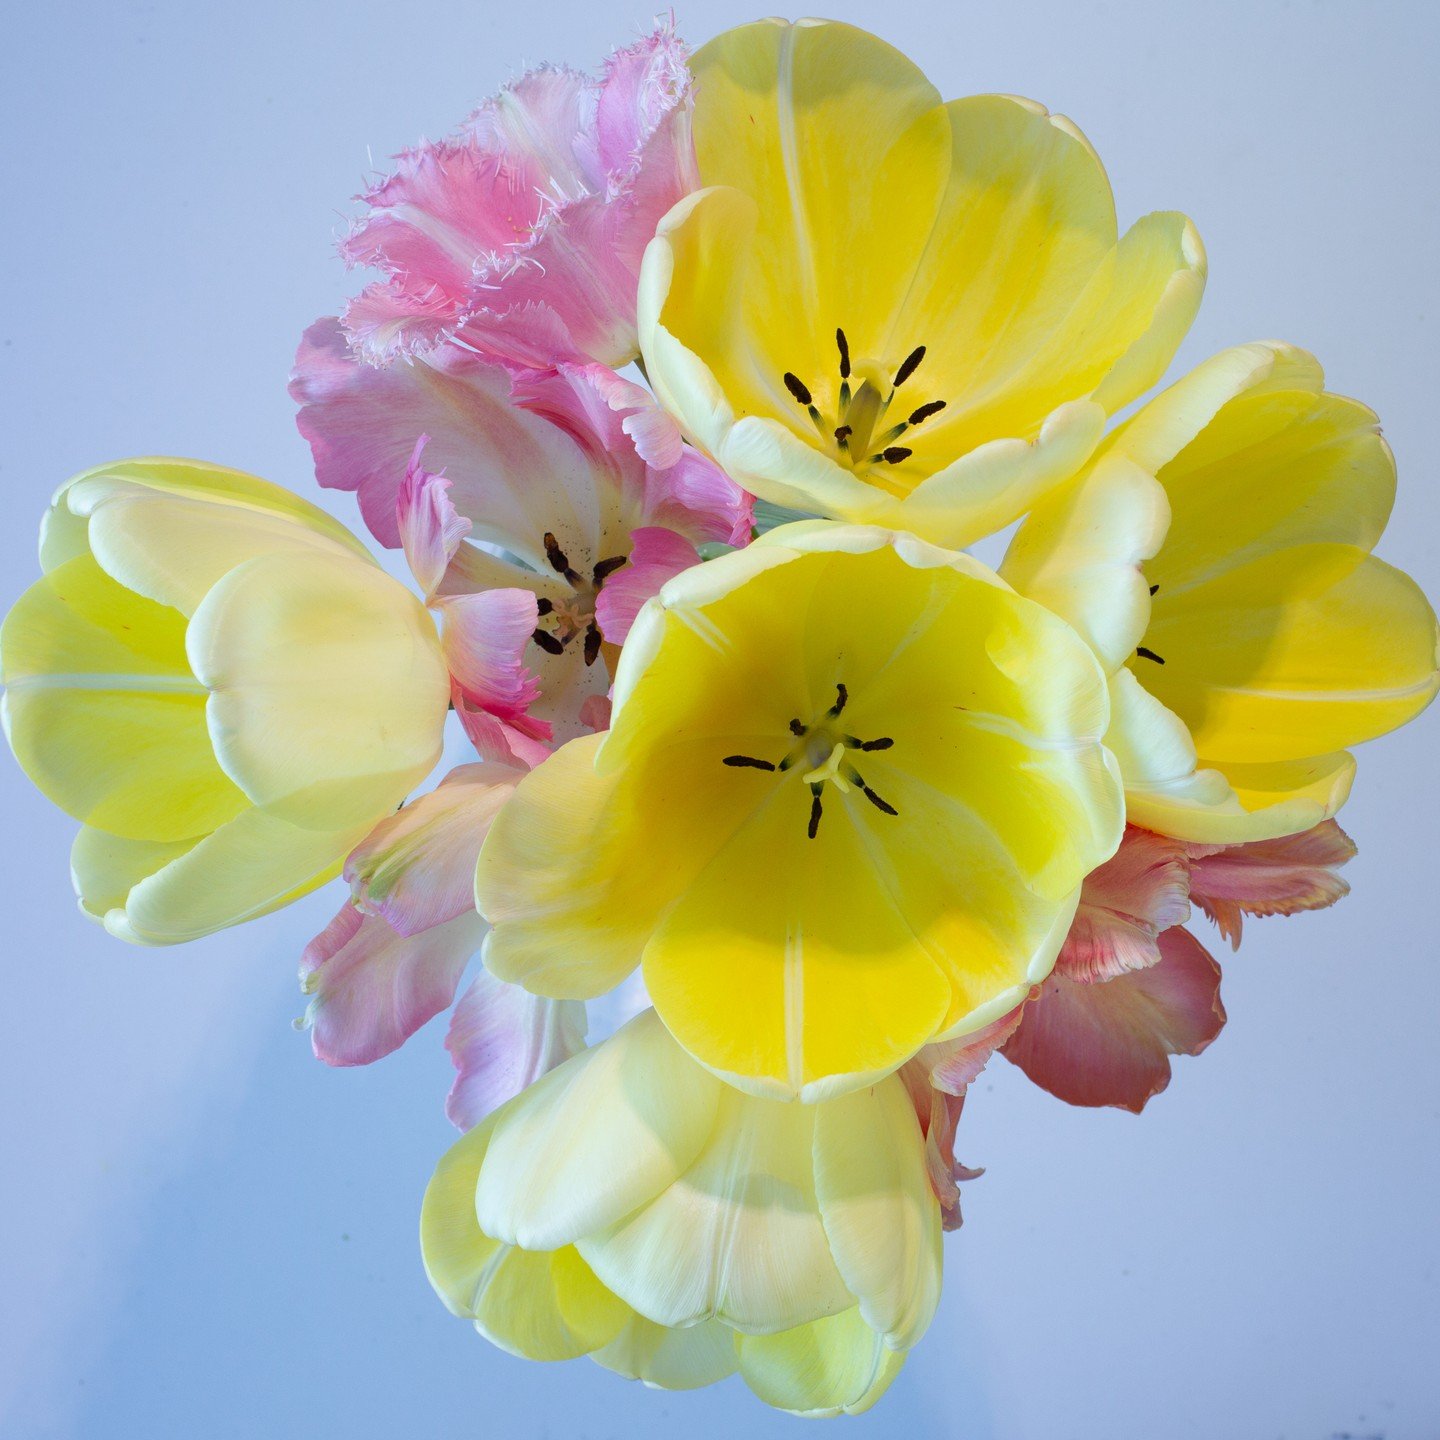 The yellow tulips from @sunkissed.flowerfarm are spring stars. Just yummy and read to have their portrait painted. #flowerart #flowerphotography #bmillerartist